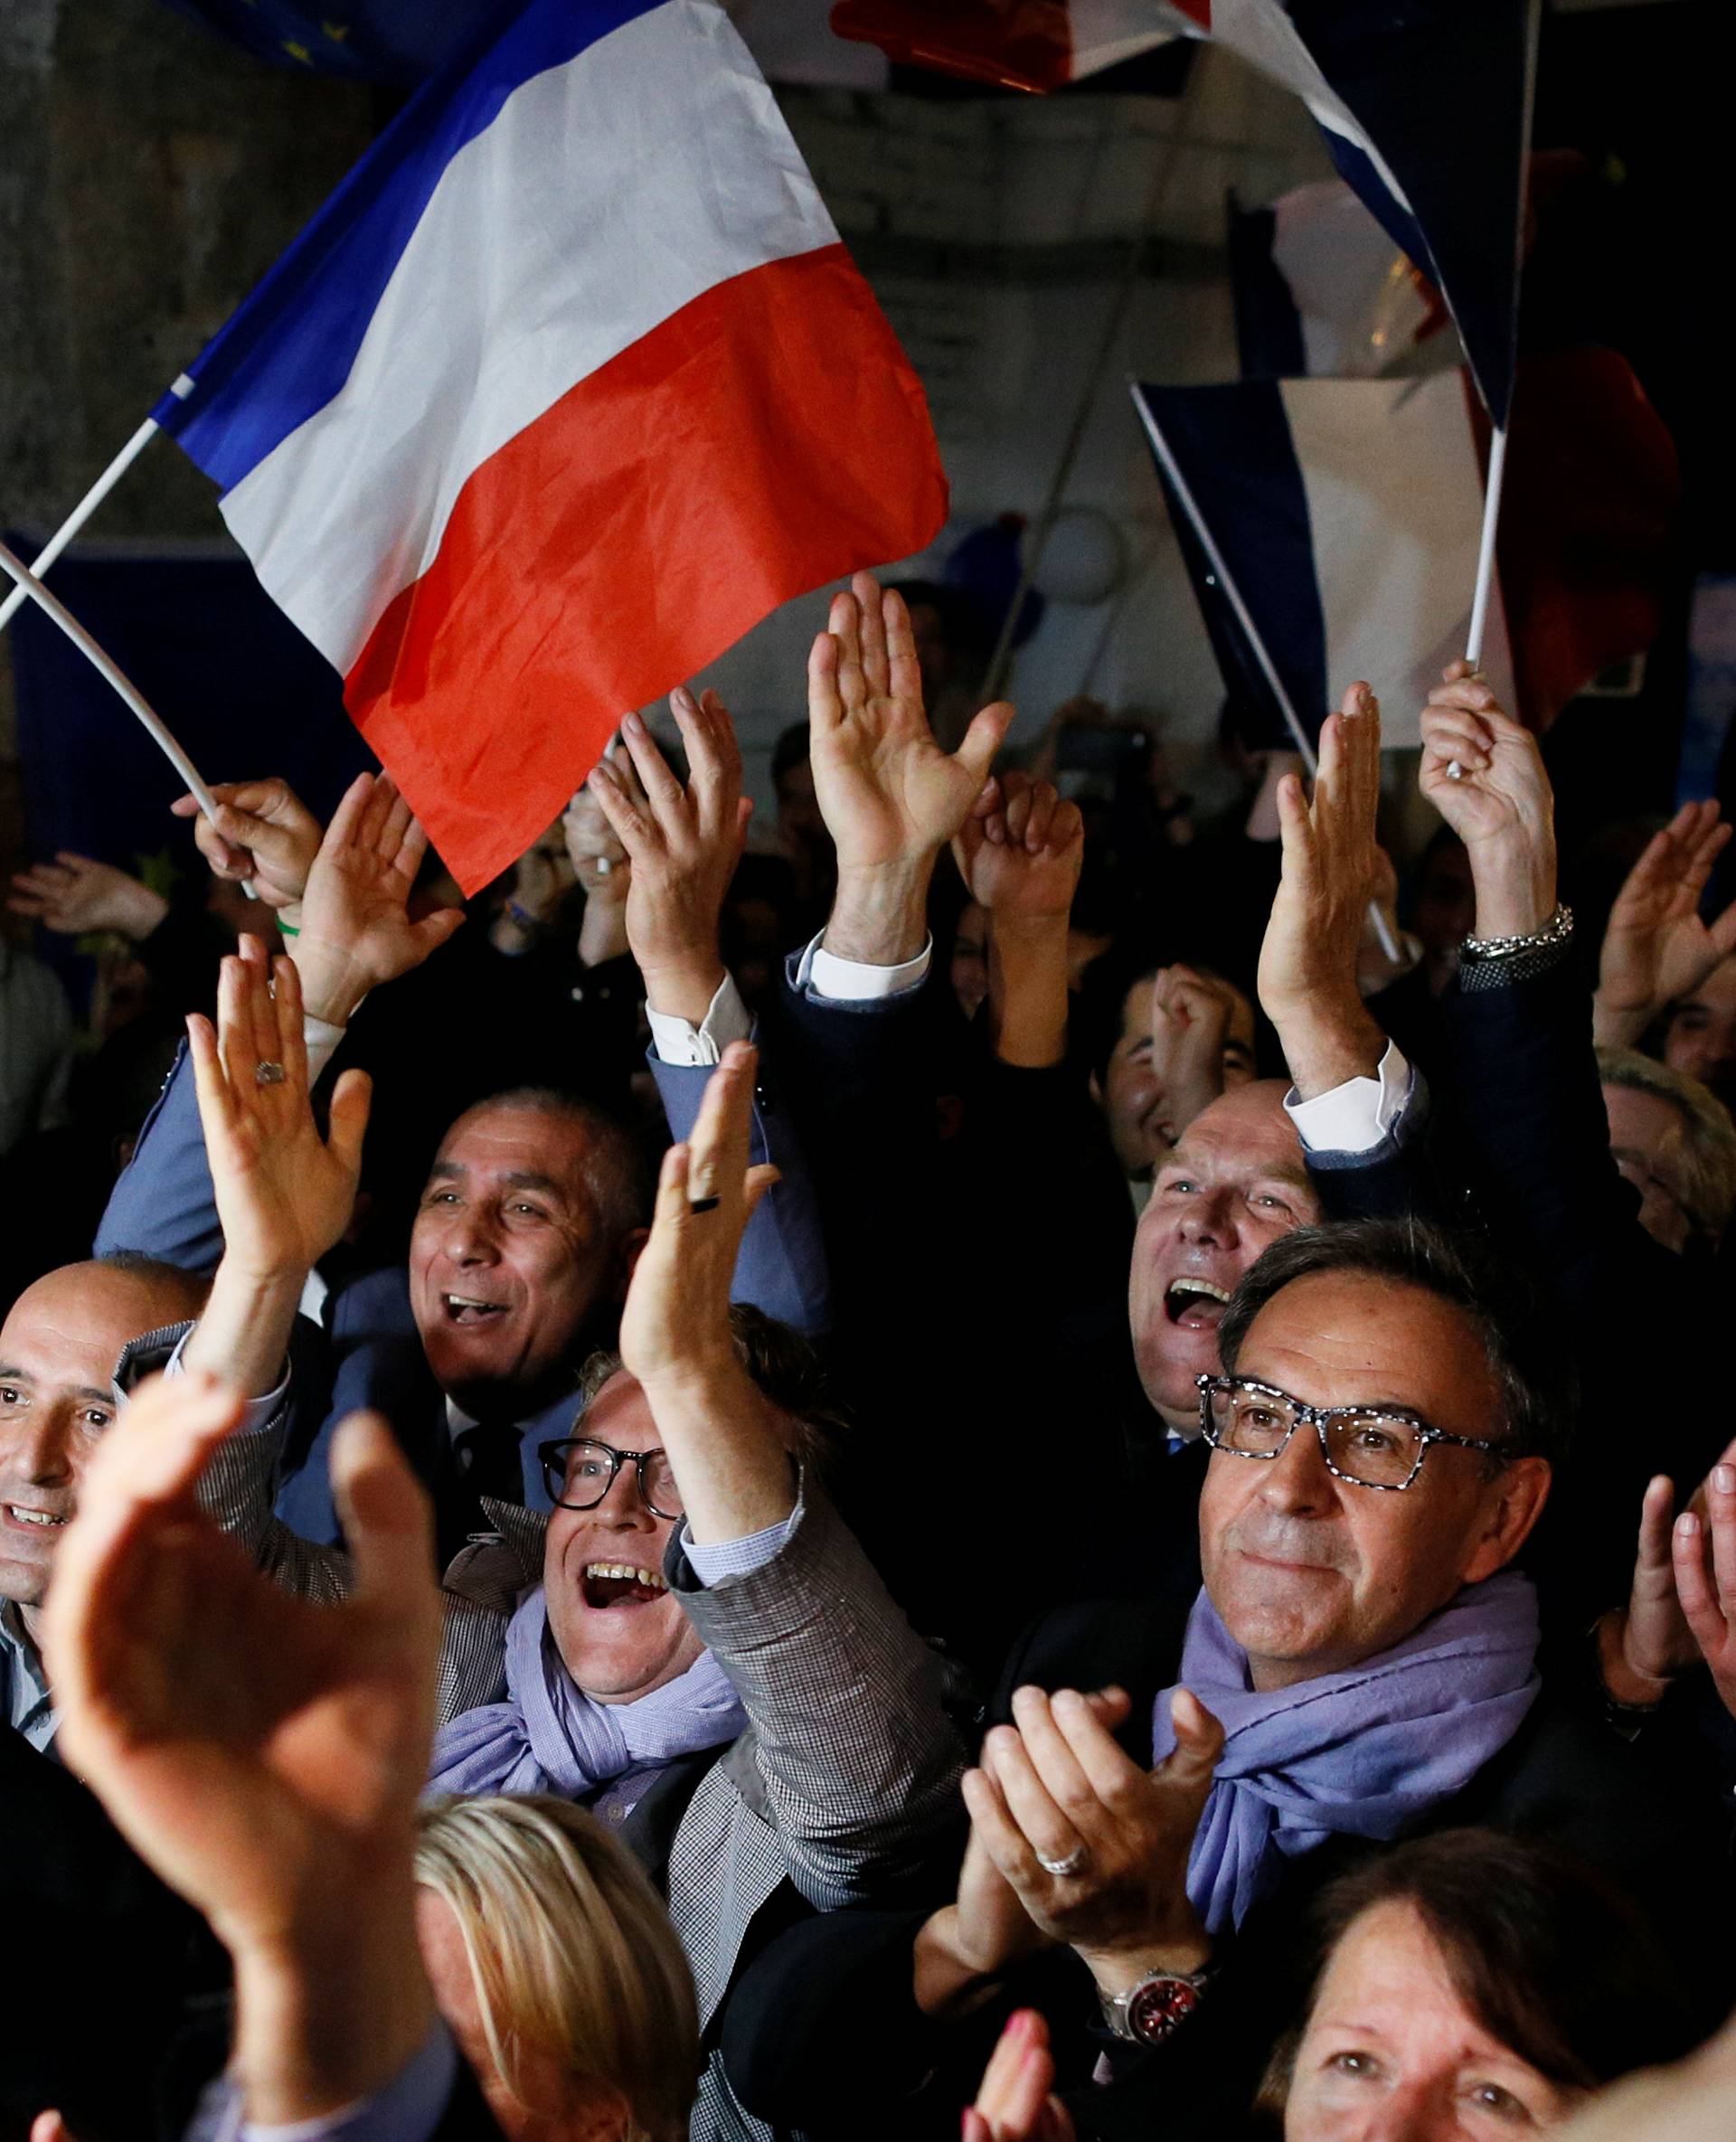 Supporters of Emmanuel Macron celebrate after the second round of 2017 French presidential election, in Lyon